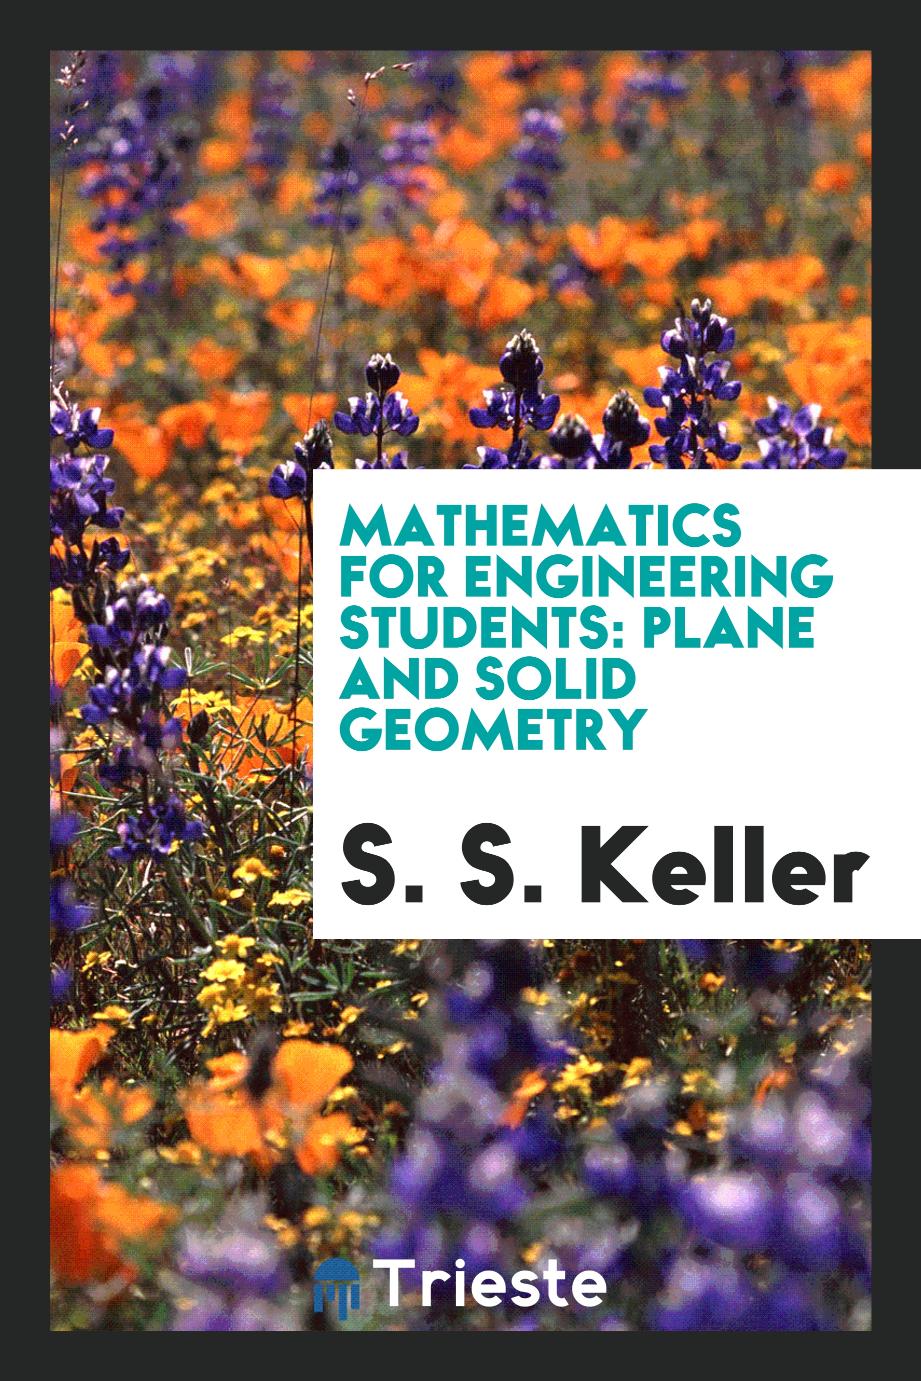 Mathematics for engineering students: Plane and solid geometry